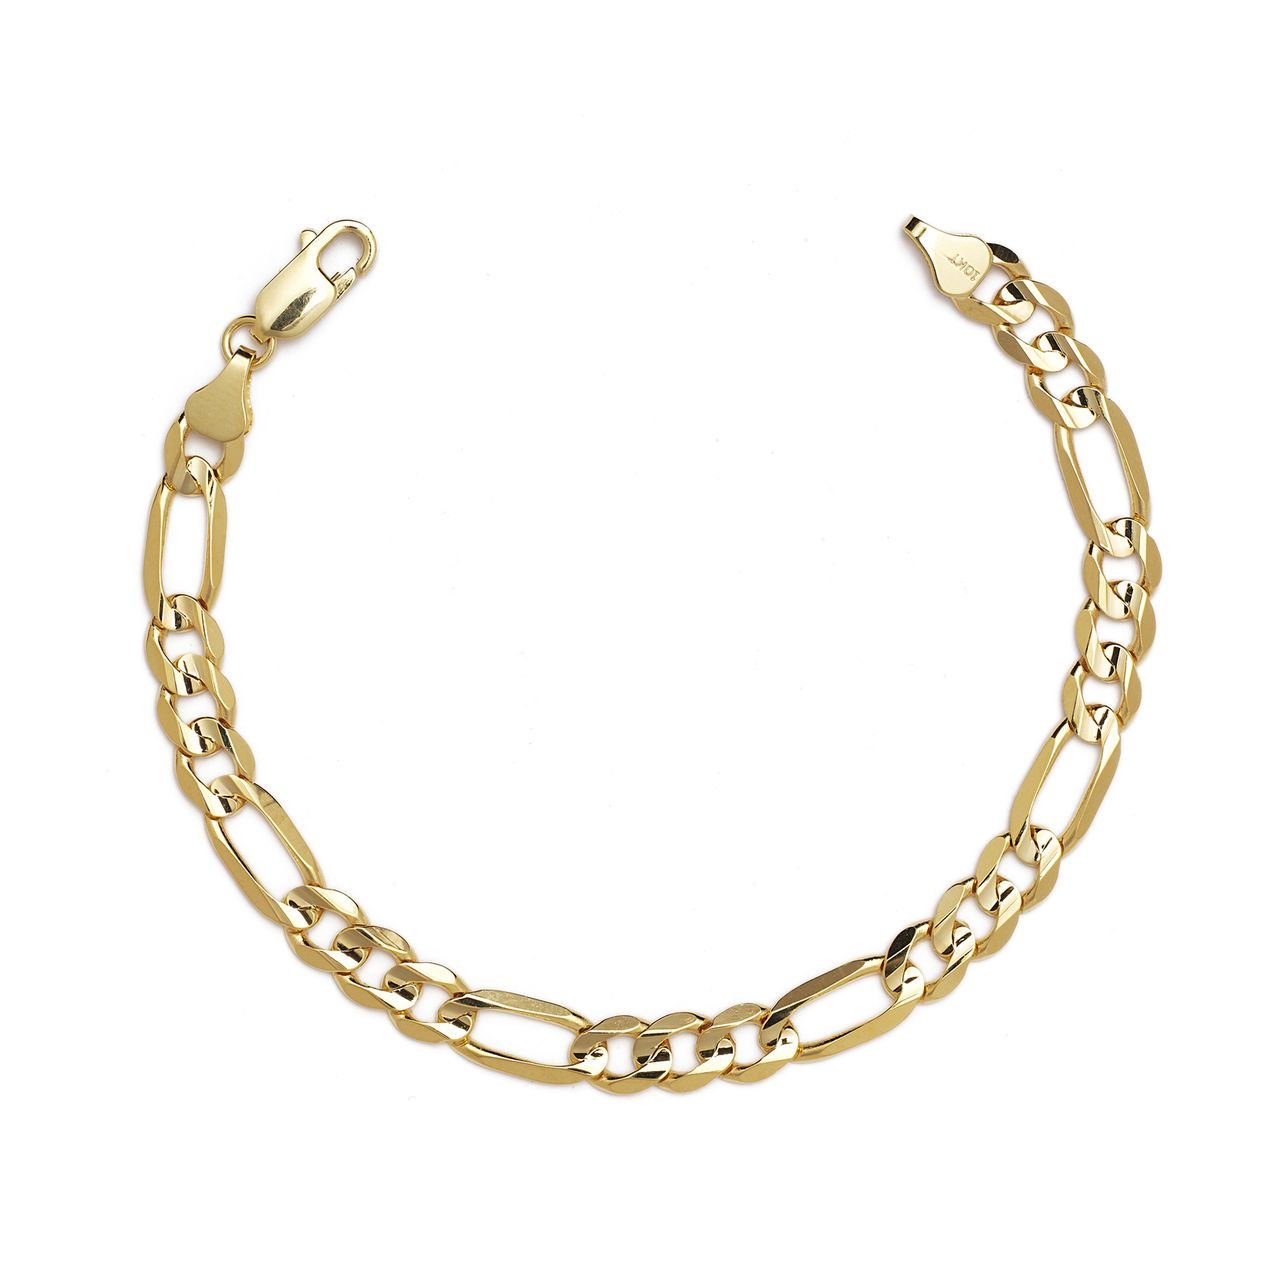 10k Yellow Gold Figaro Chain Bracelet with Concave Look, 0.28 Inch (7mm)